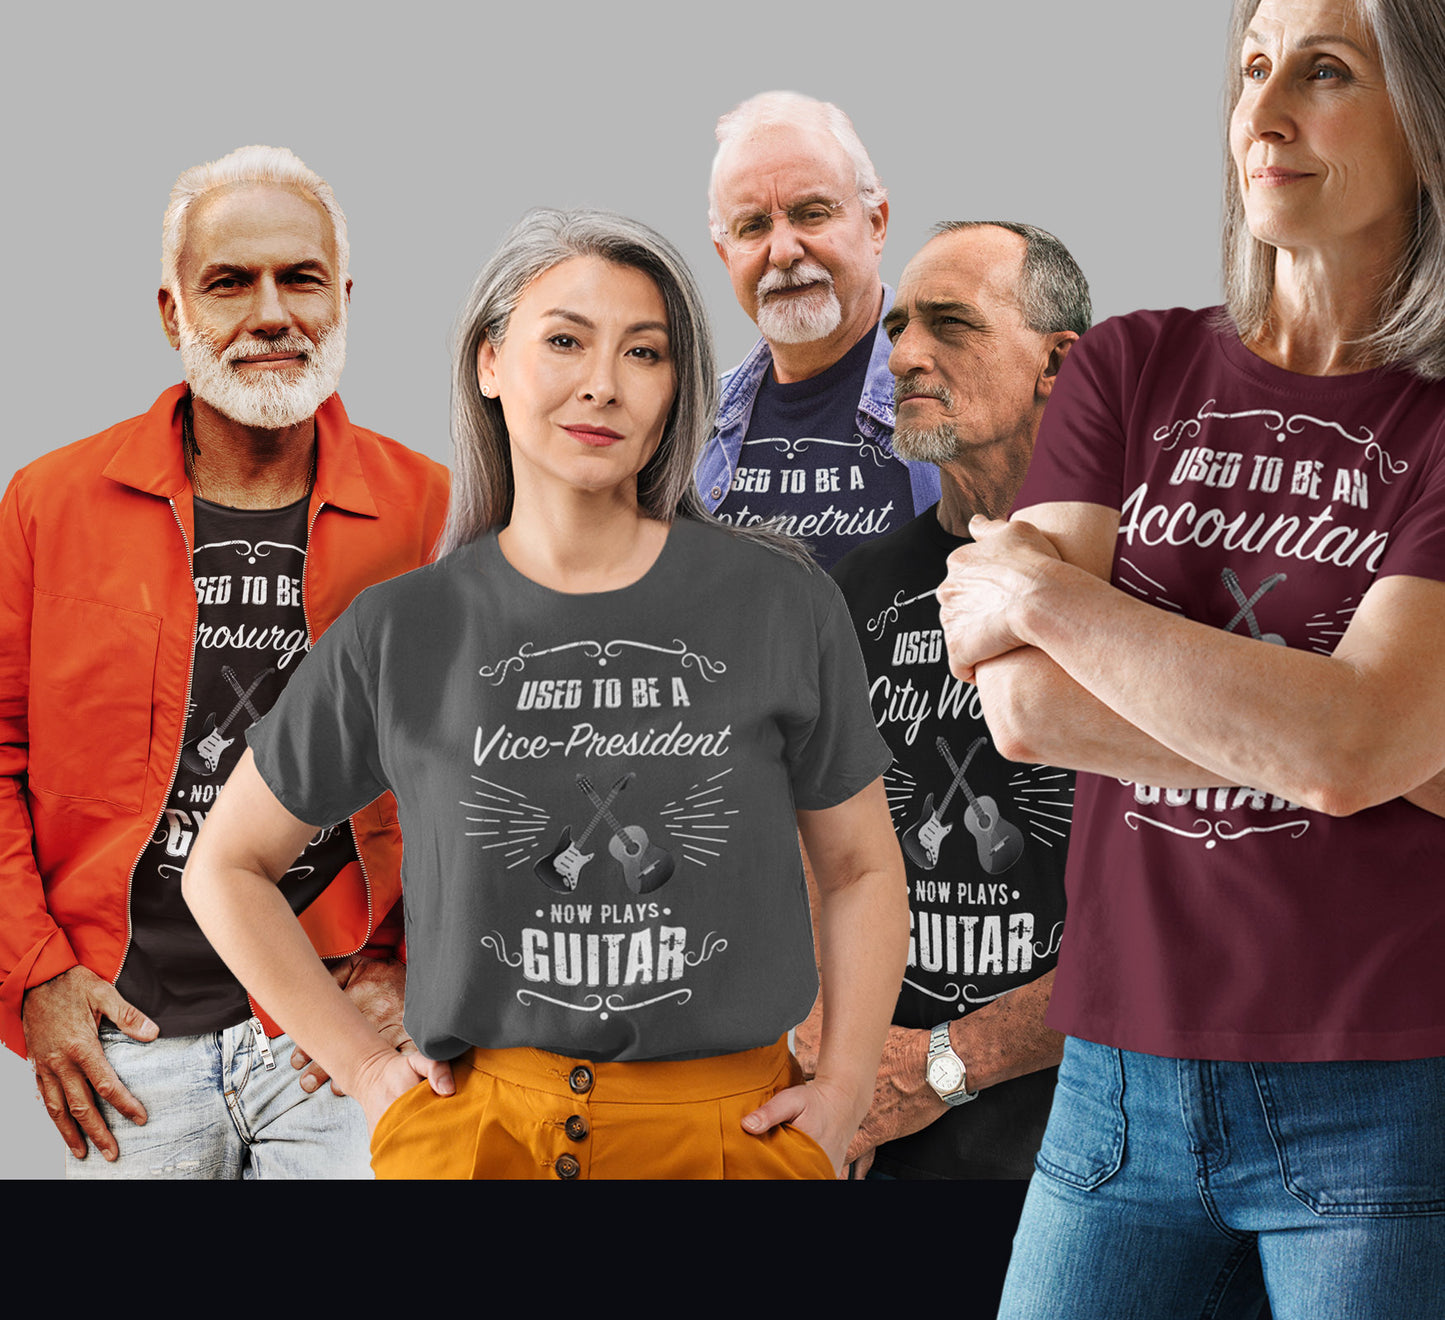 Used to be a MECHANIC; Now Plays GUITAR - Funny Retirement Gift, Unisex T-shirt Bella+Canvas 3001, dark shirt colors for amateur musician/guitar player